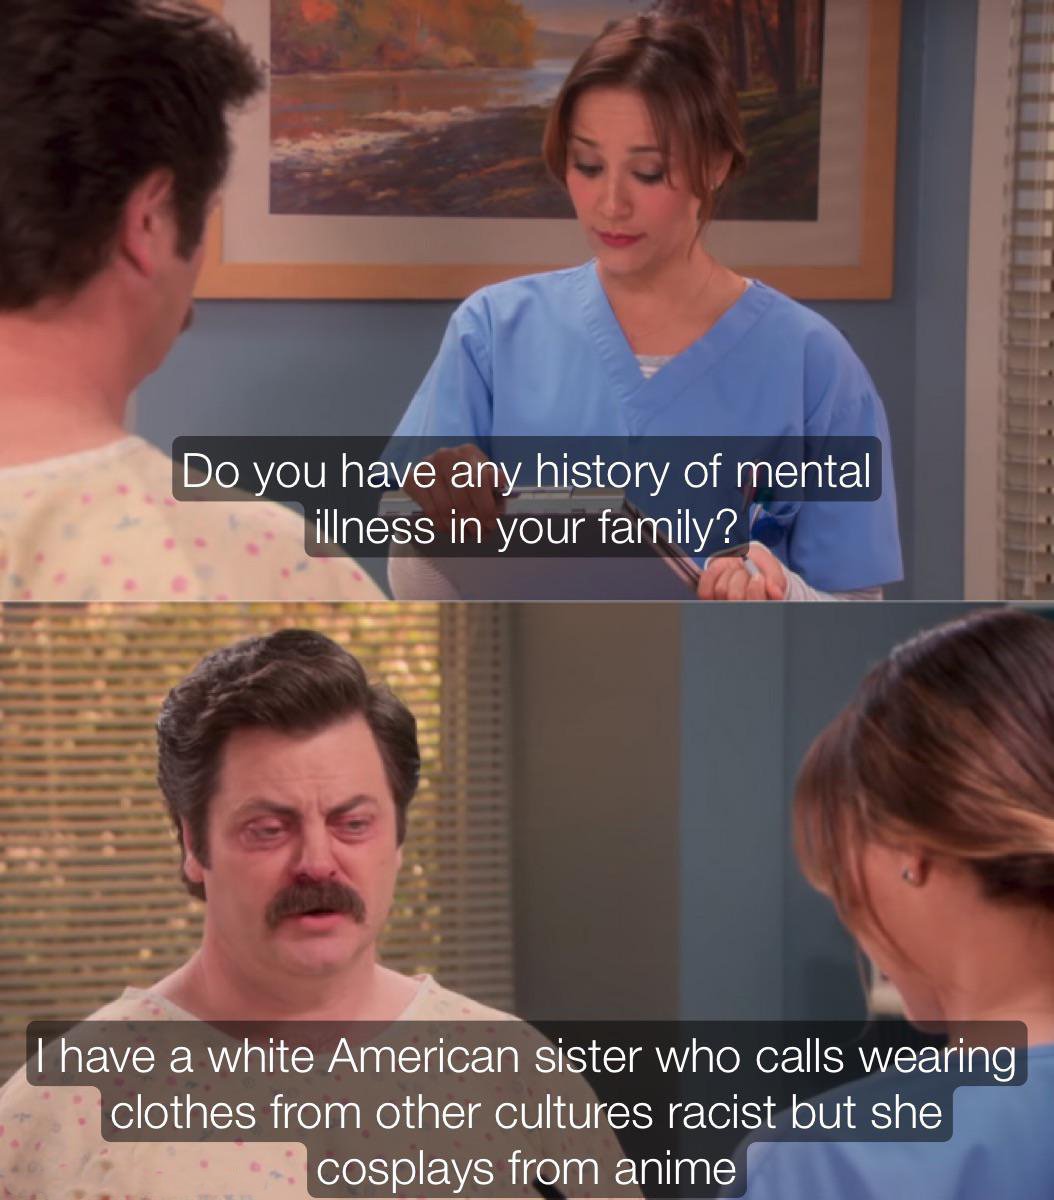 funny memes and pics - twitter product manager meme - Do you have any history of mental illness in your family? I have a white American sister who calls wearing clothes from other cultures racist but she cosplays from anime